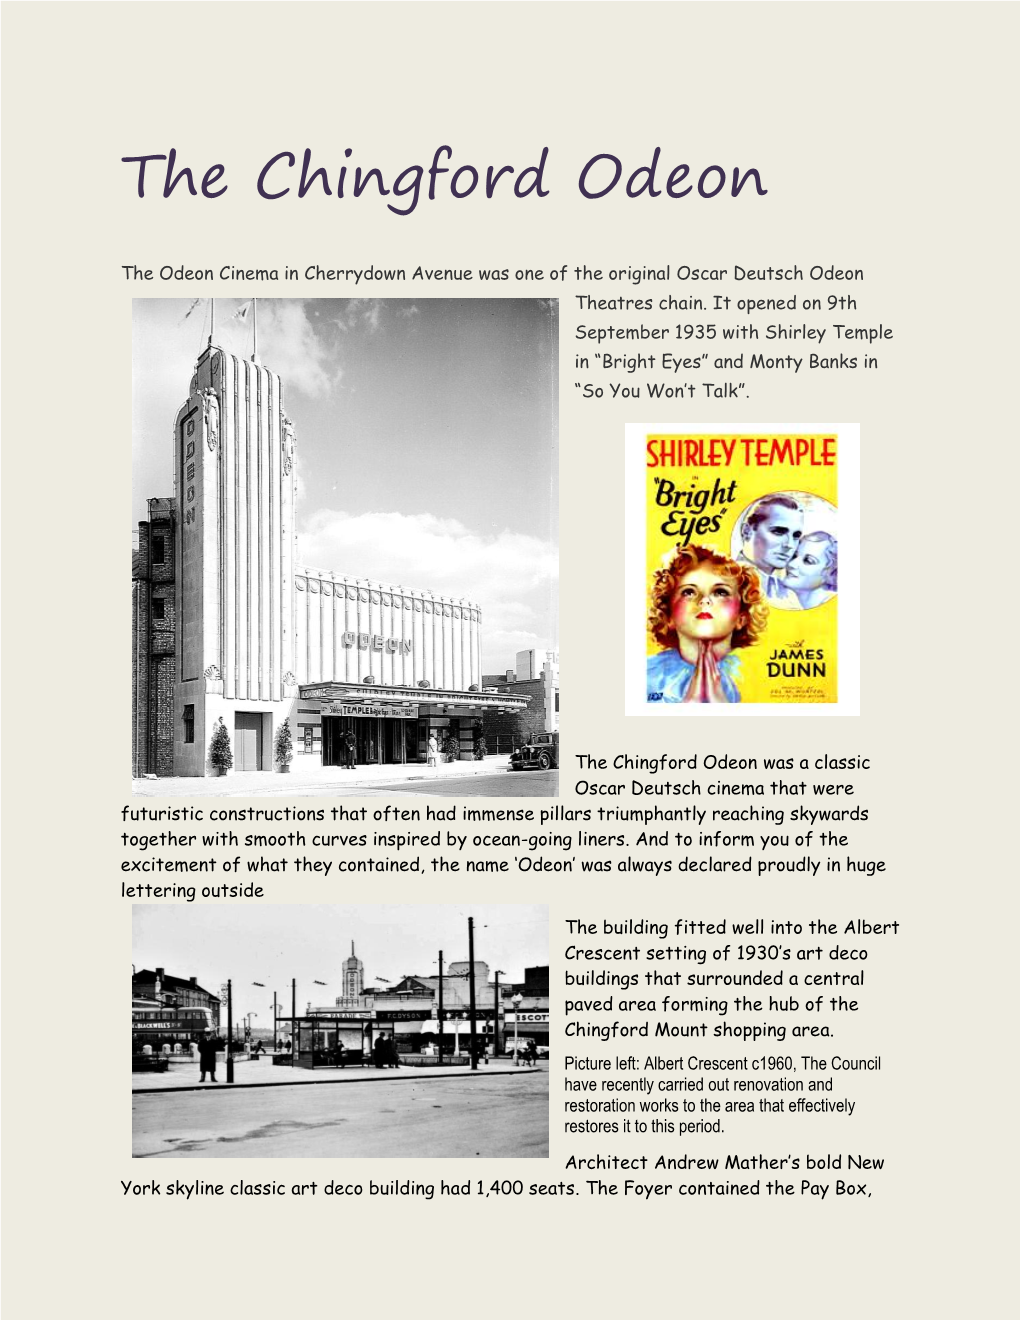 The Chingford Odeon